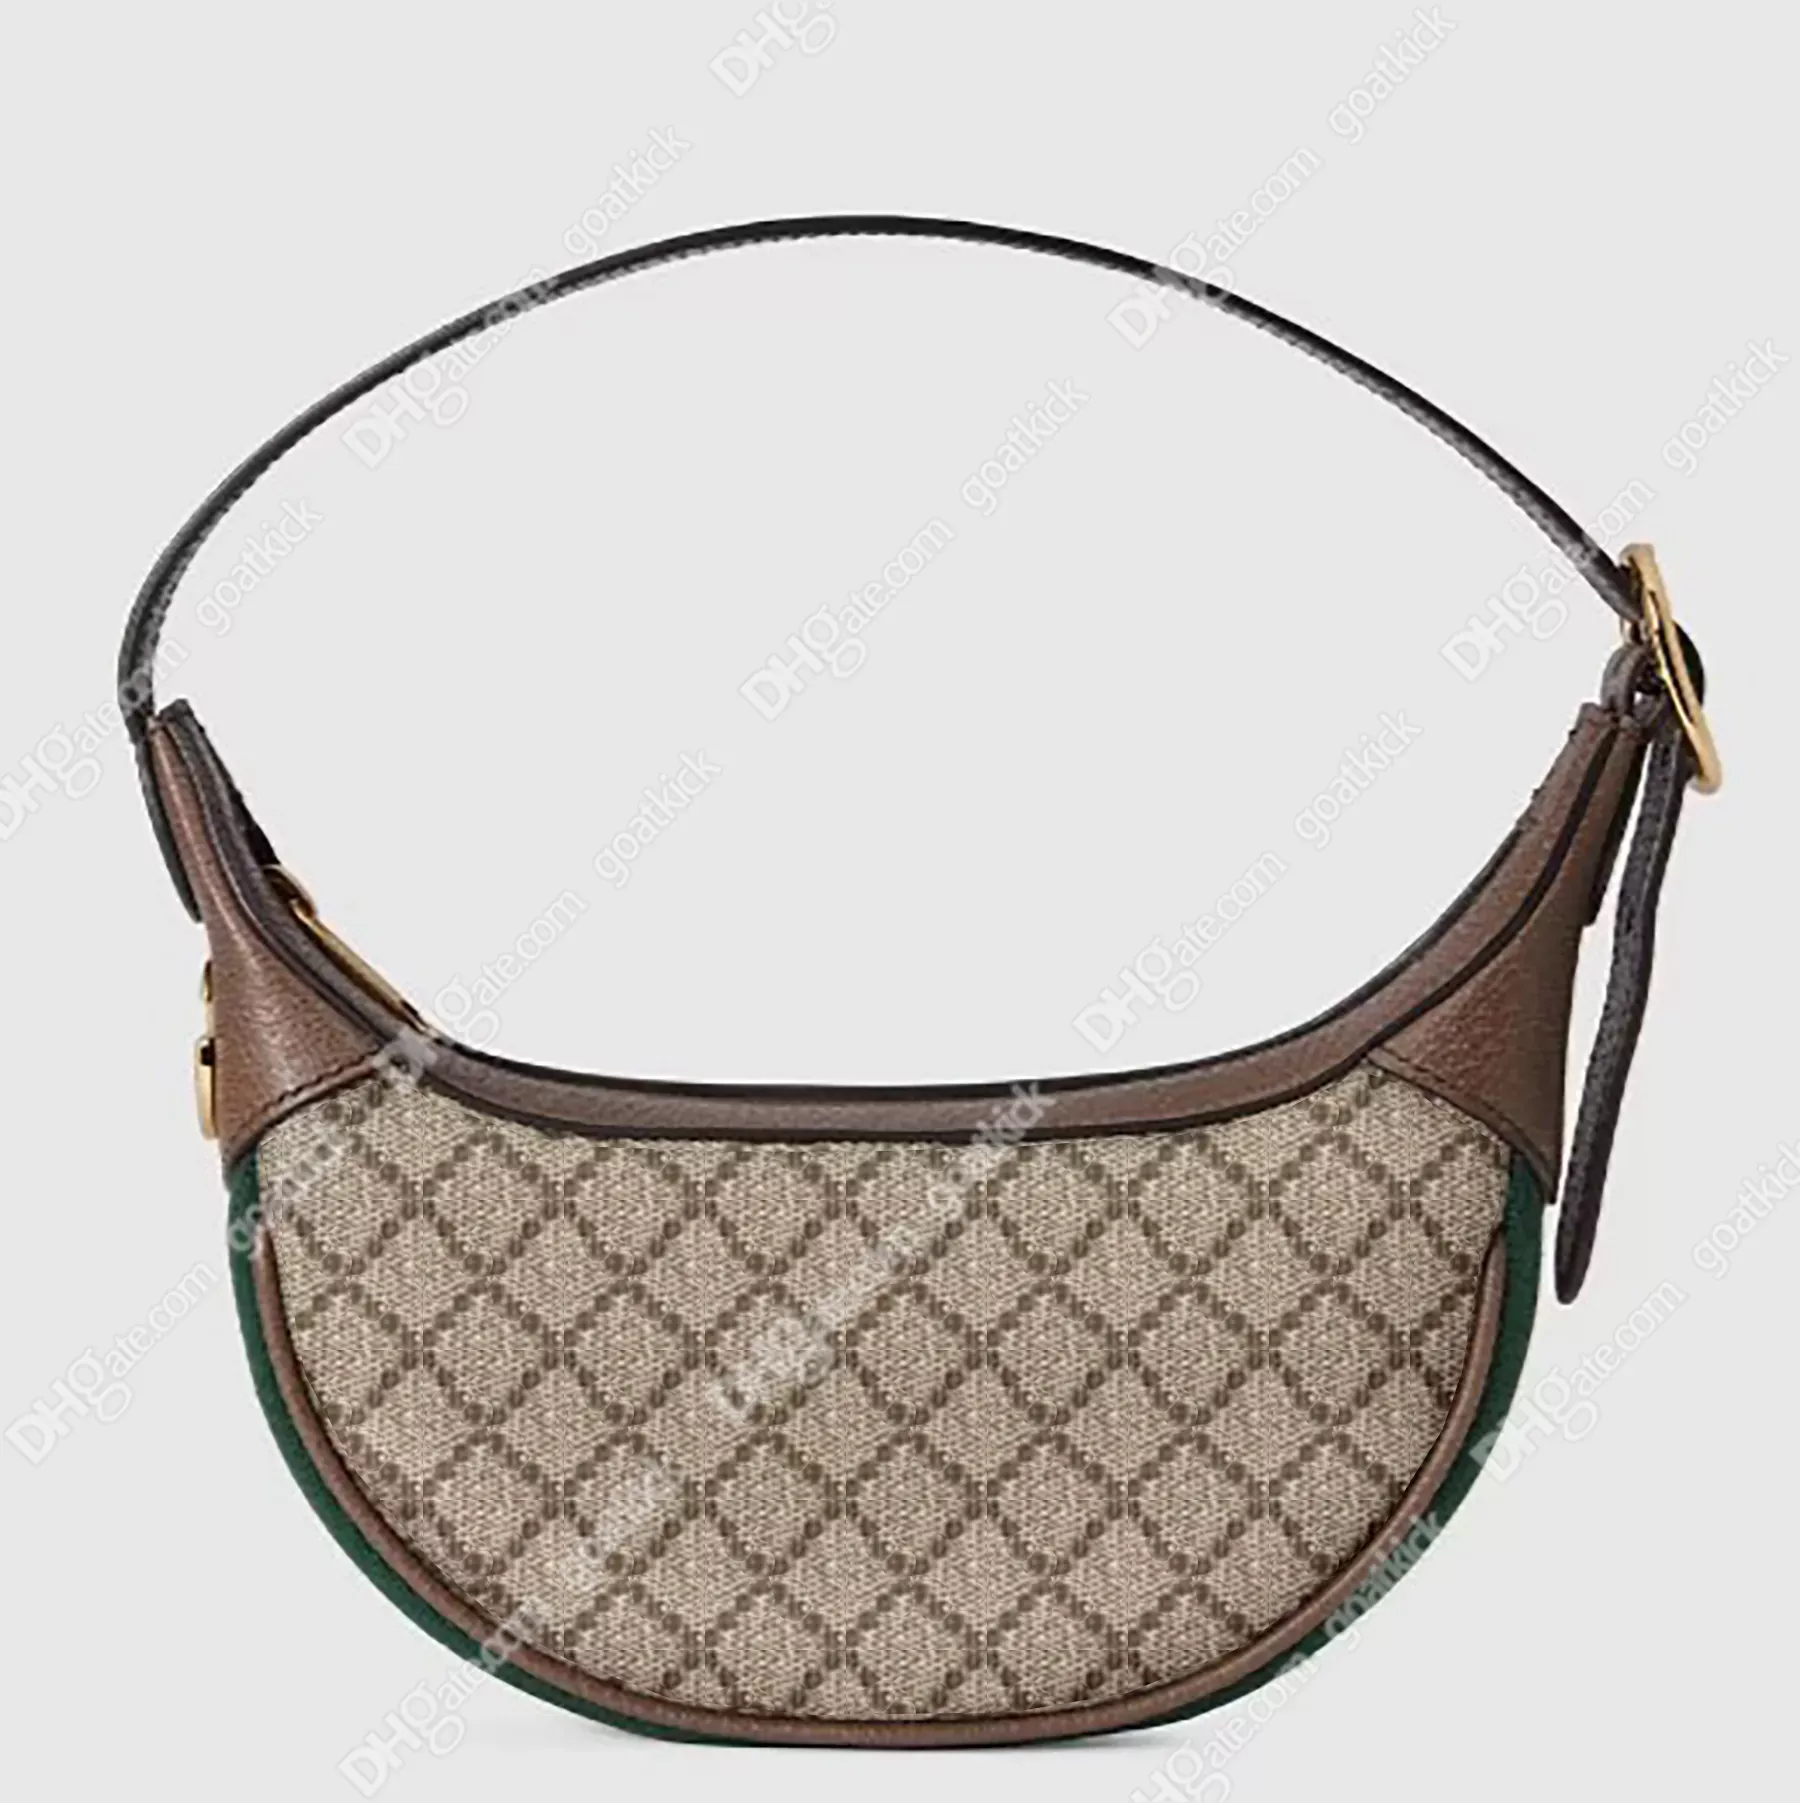 OMG!! I bought a DHGate Gucci Lady Web Crossbody Bag and it's